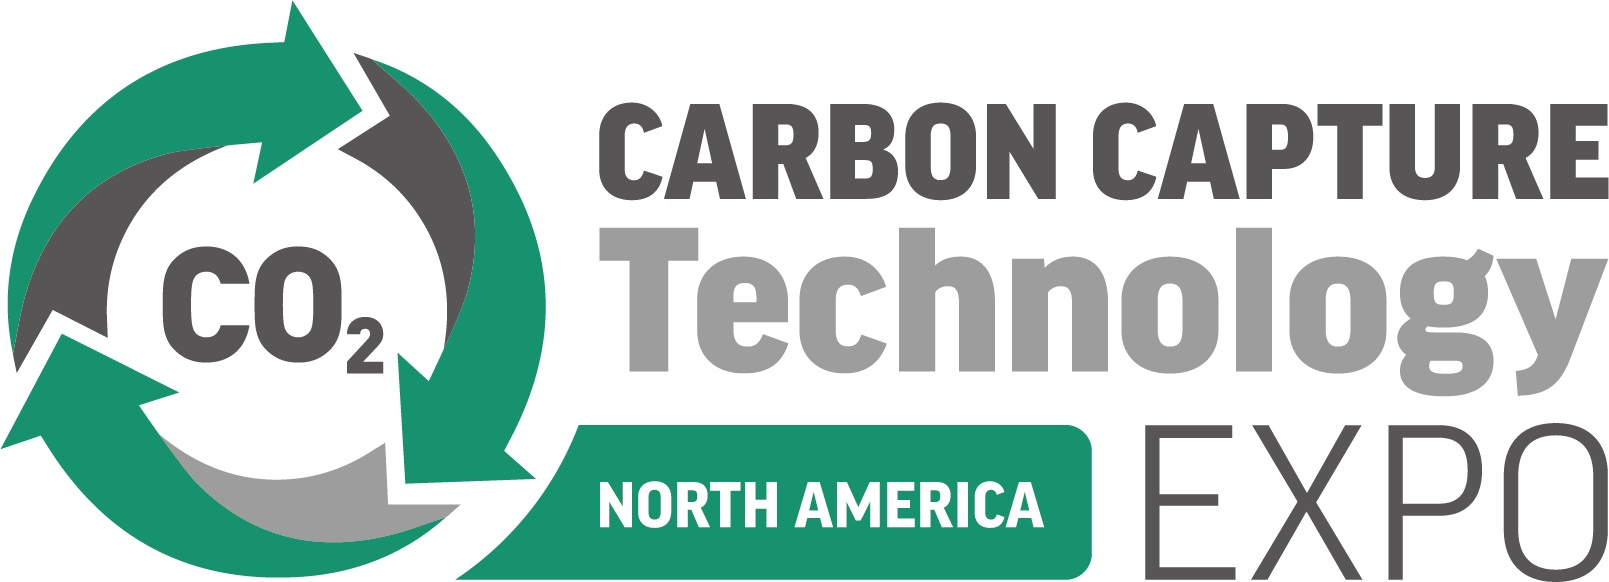 Carbon Capture Technology Conference & Expo North America